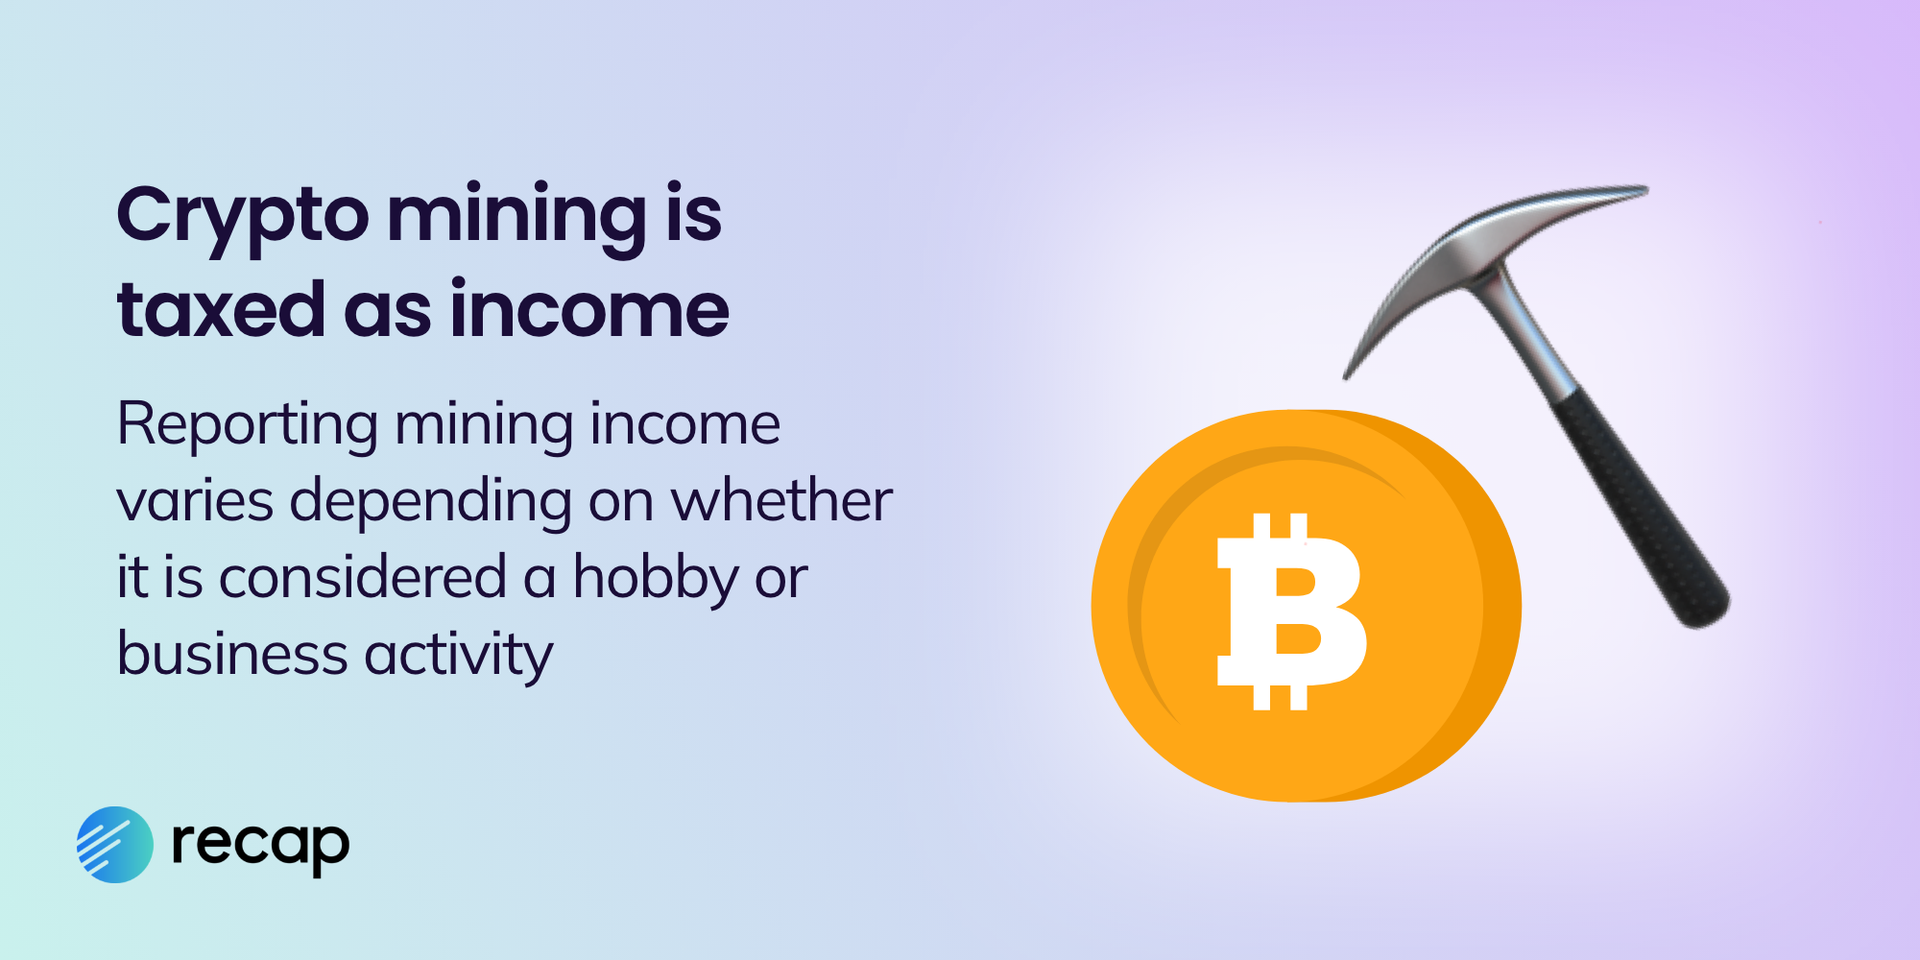 An infographic stating that crypto mining is taxed as income and reporting income depends on whether it is considered a hobby or business activity